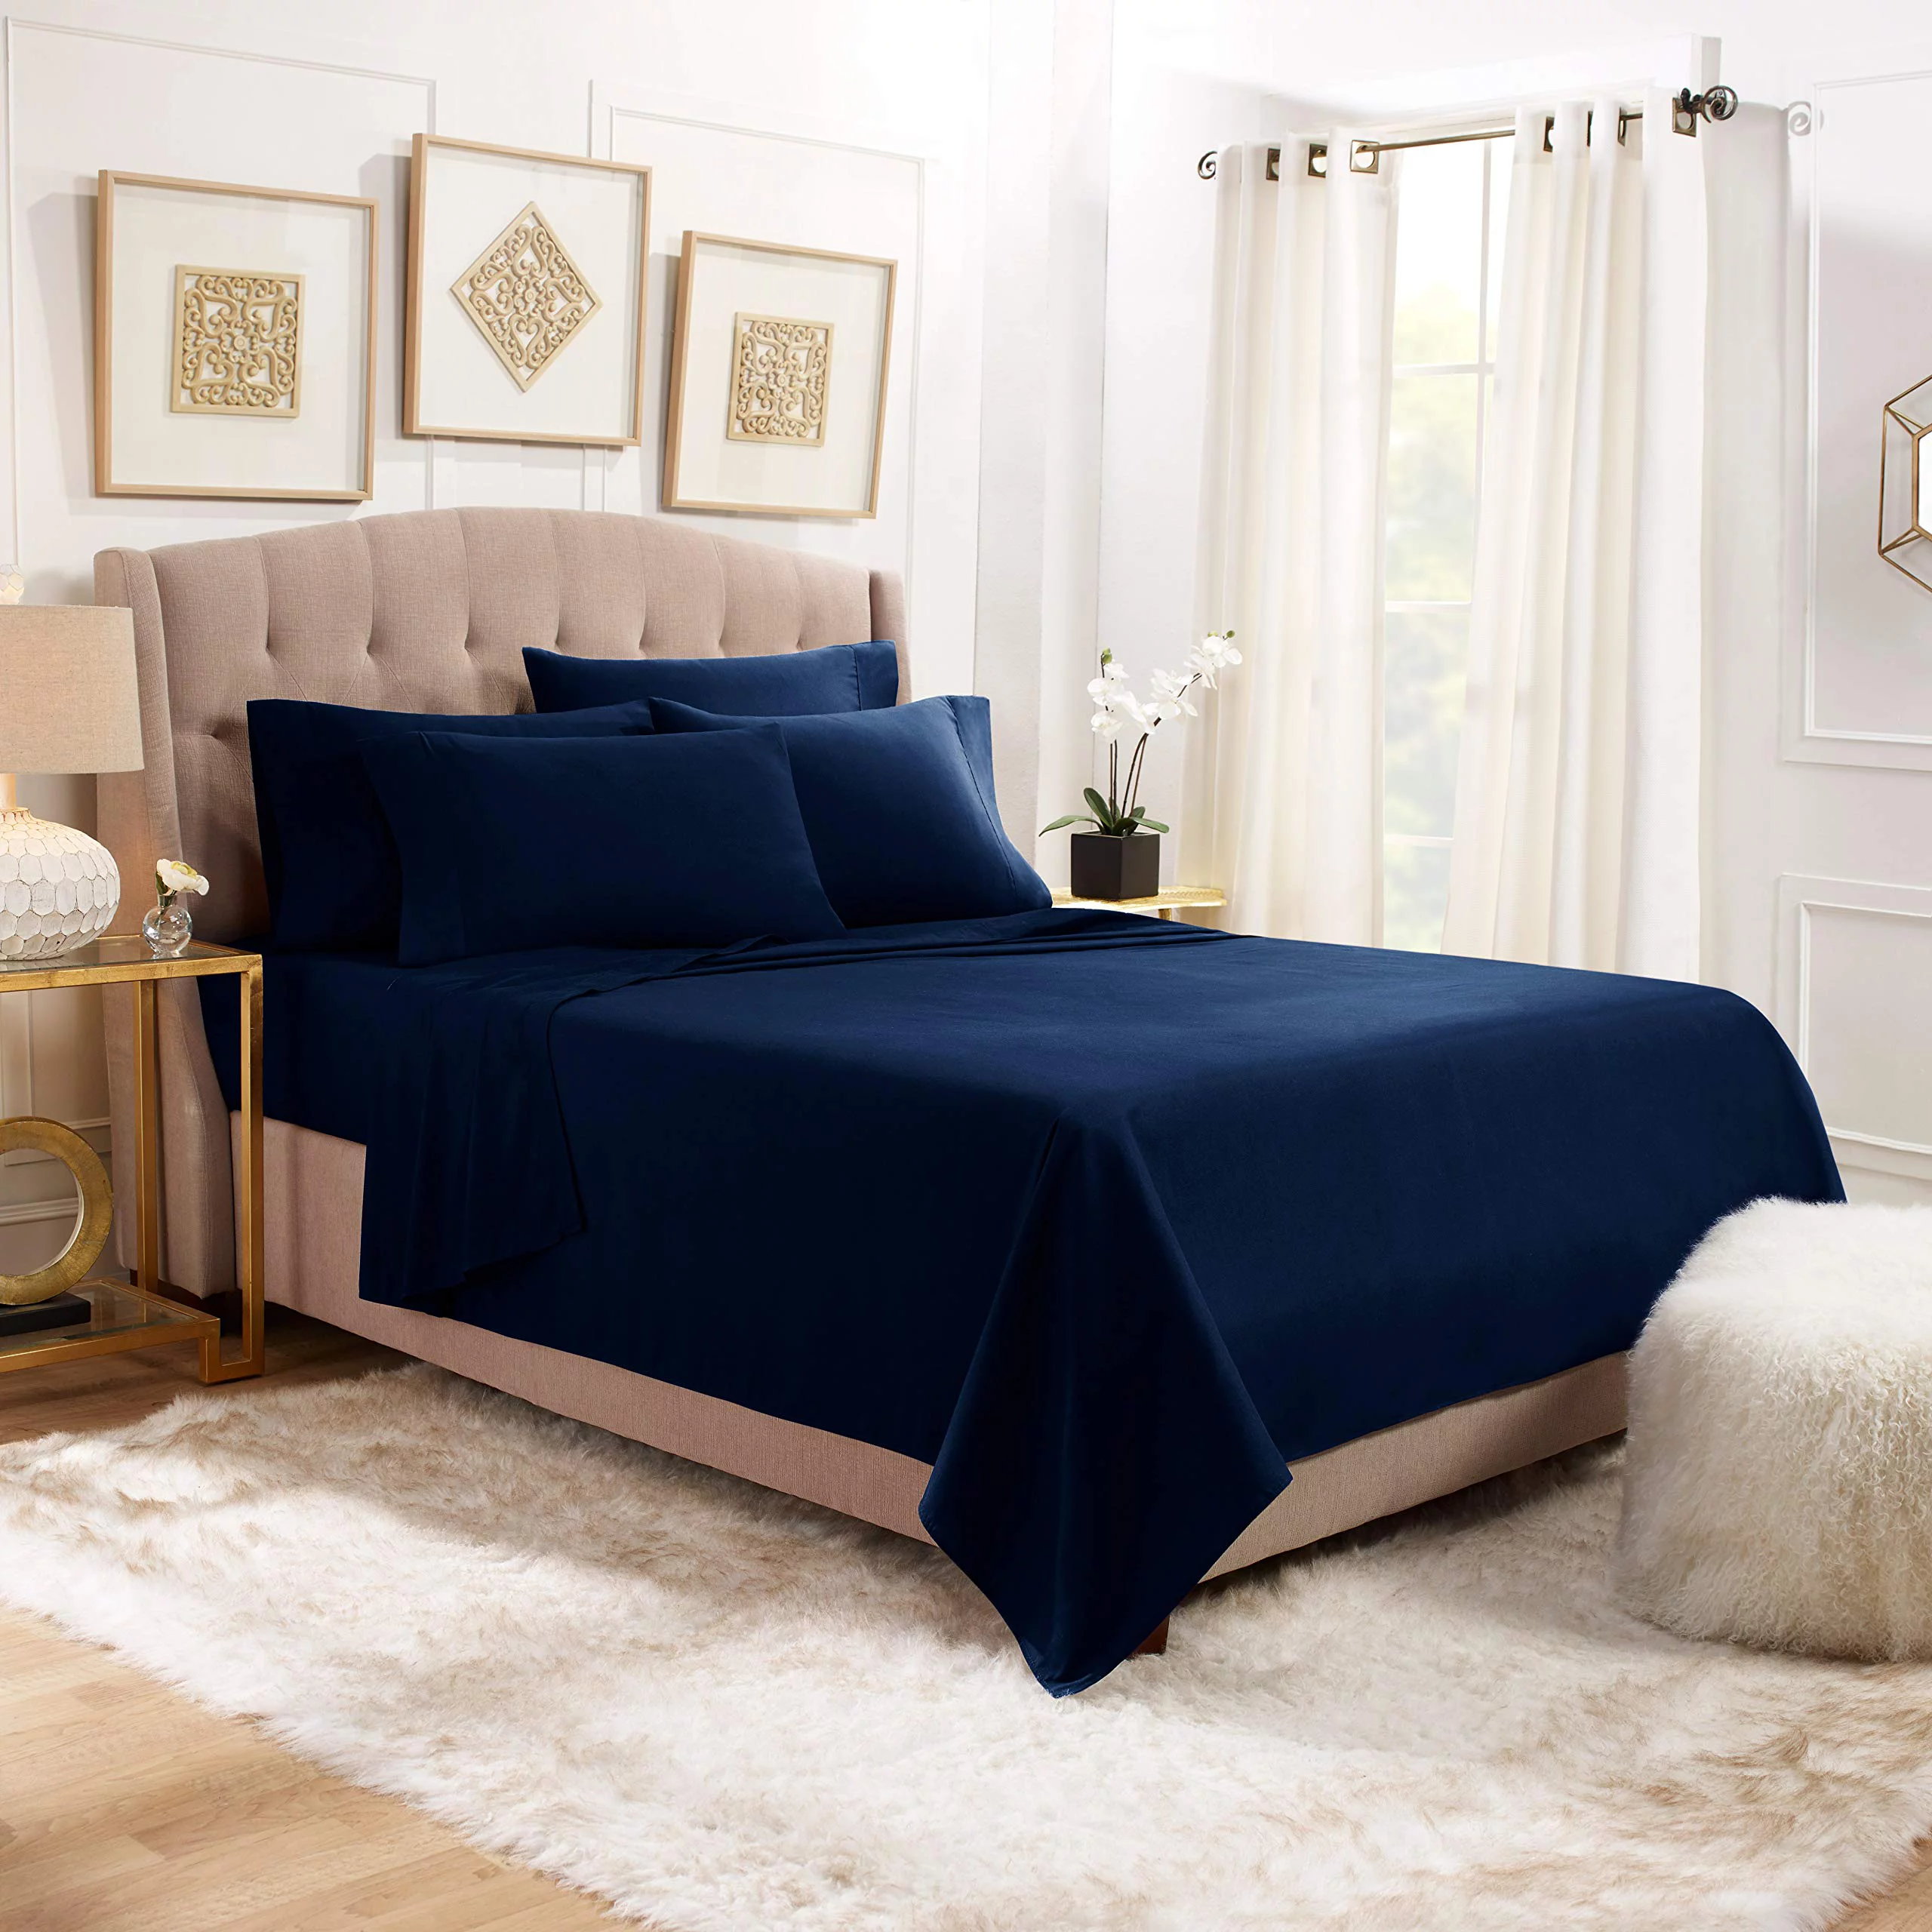  Blue duvet and pillows on a dark wood bed frame.